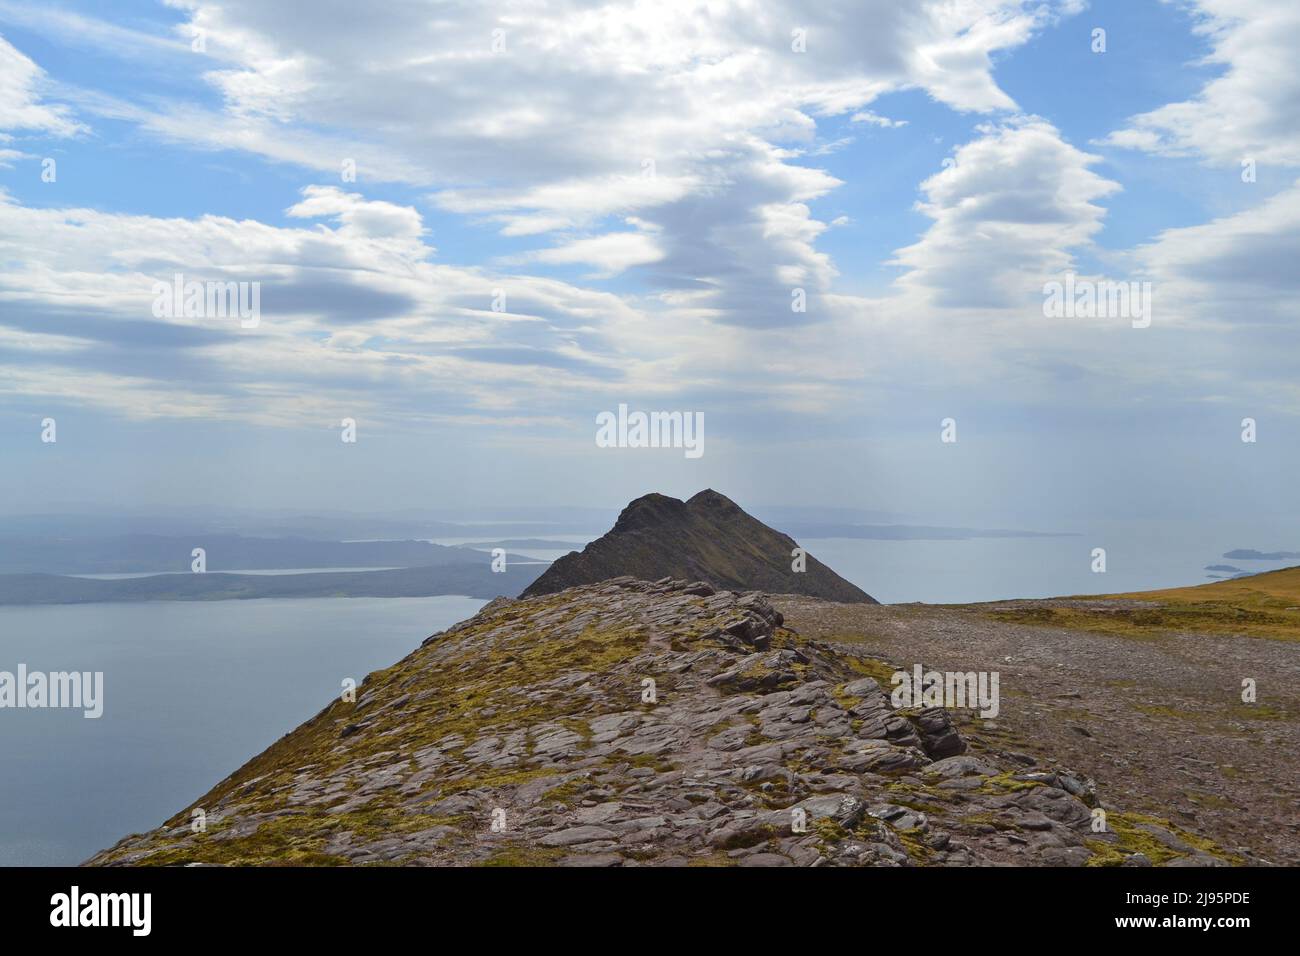 A peak of Ben Mor Coigach, a ridge near Ullapool, hikers, walkers, views of Summer Isles. Loch Broom in the background. NW Scotland, Assynt Stock Photo